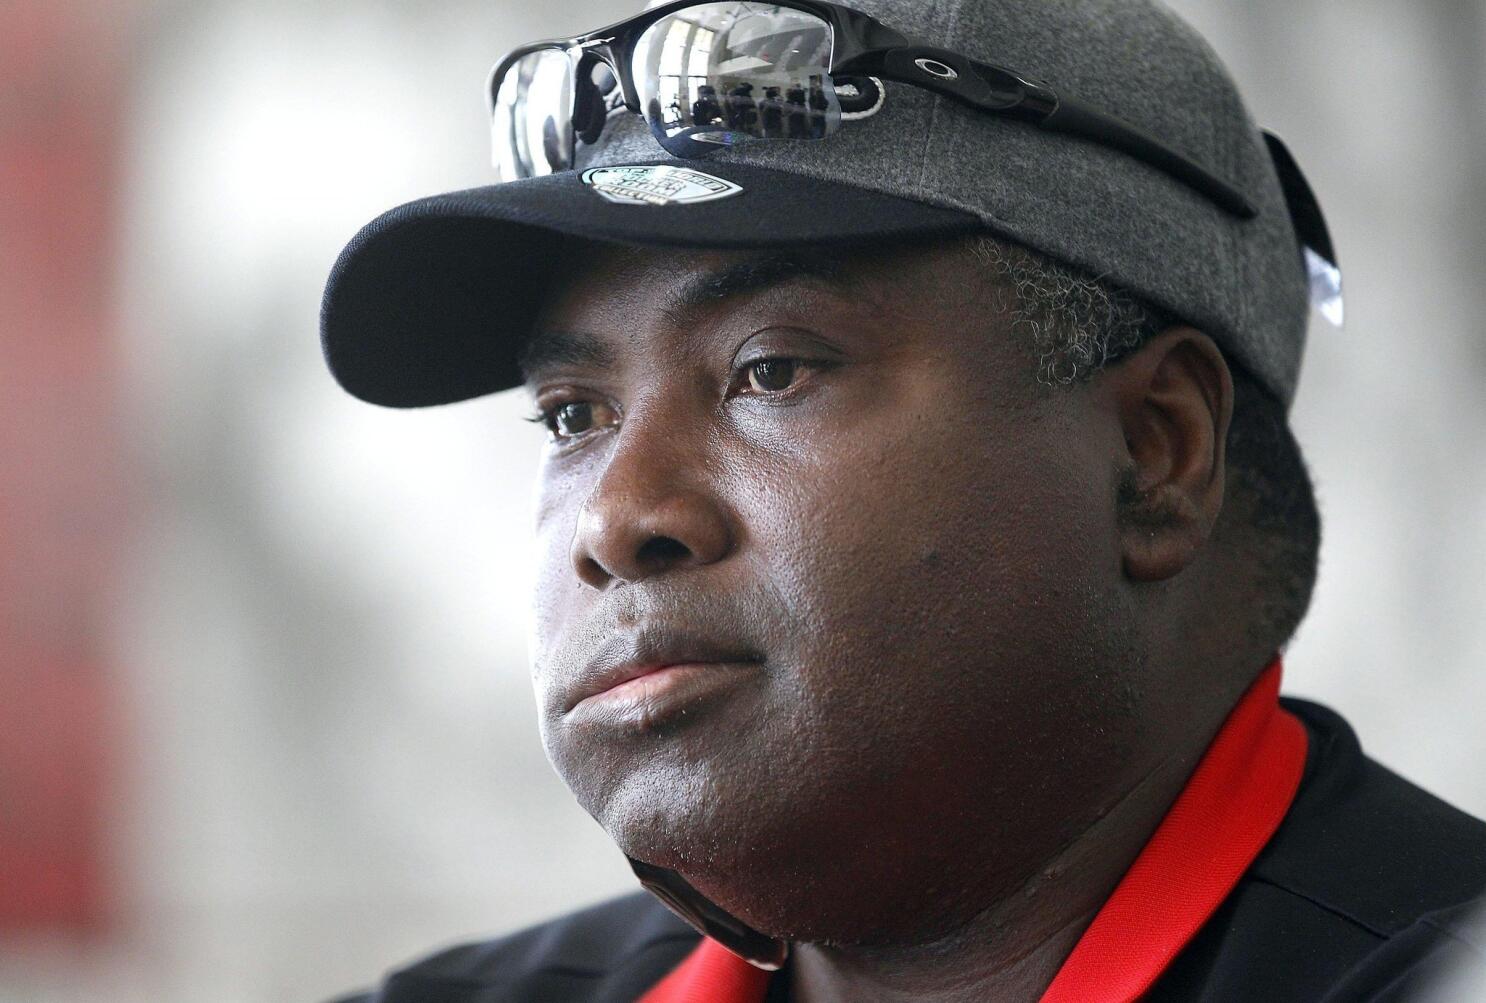 Family Of Late Baseball Superstar Tony Gwynn Suing Tobacco Giant, Altria  Group